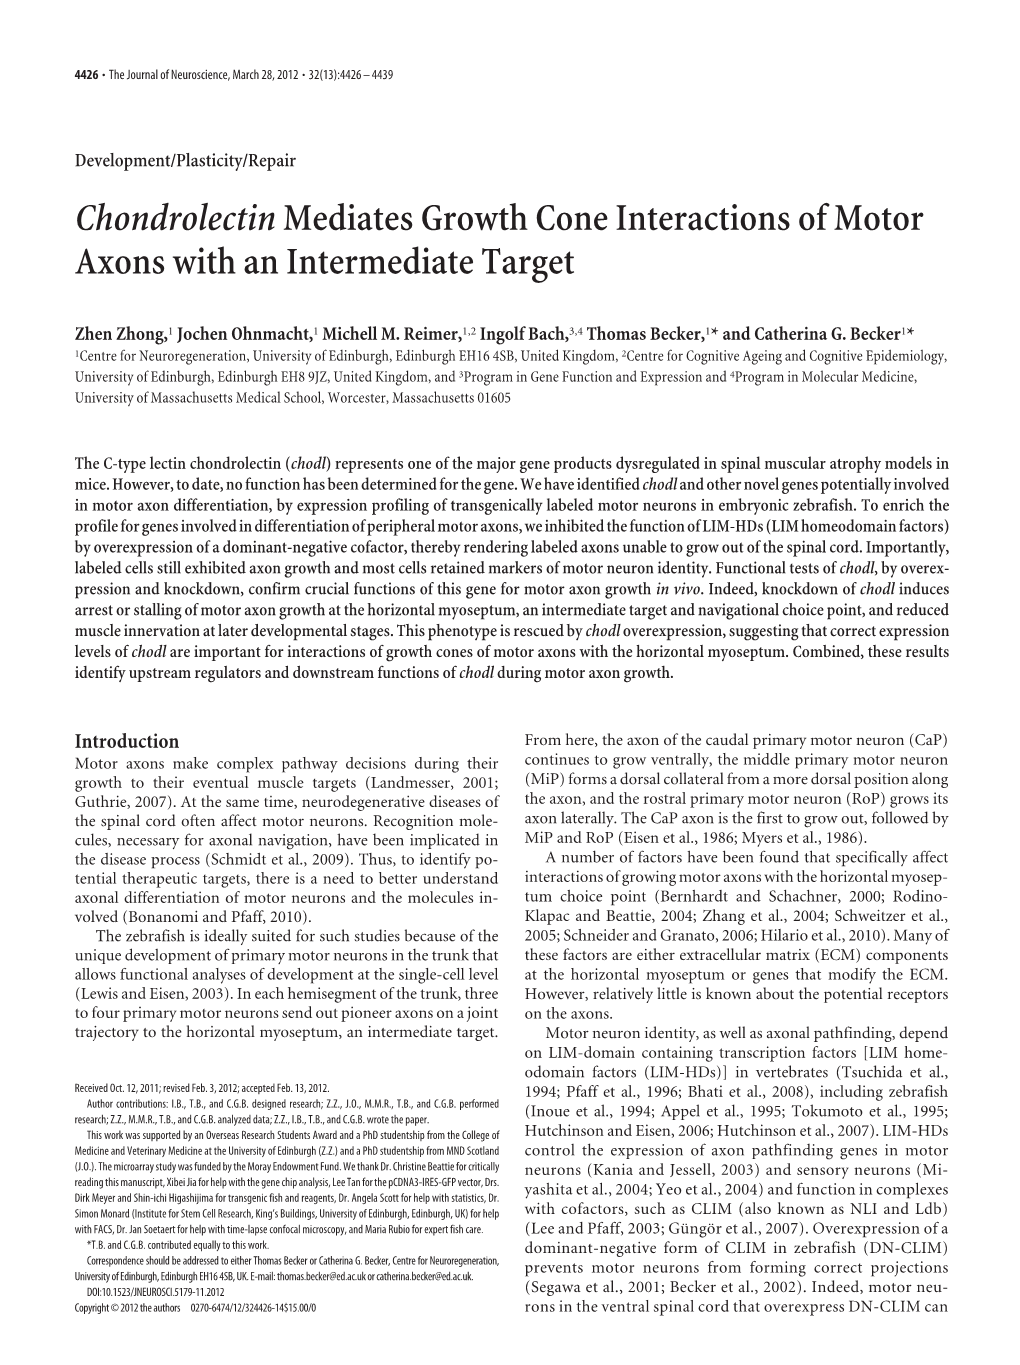 Chondrolectinmediates Growth Cone Interactions of Motor Axons with An